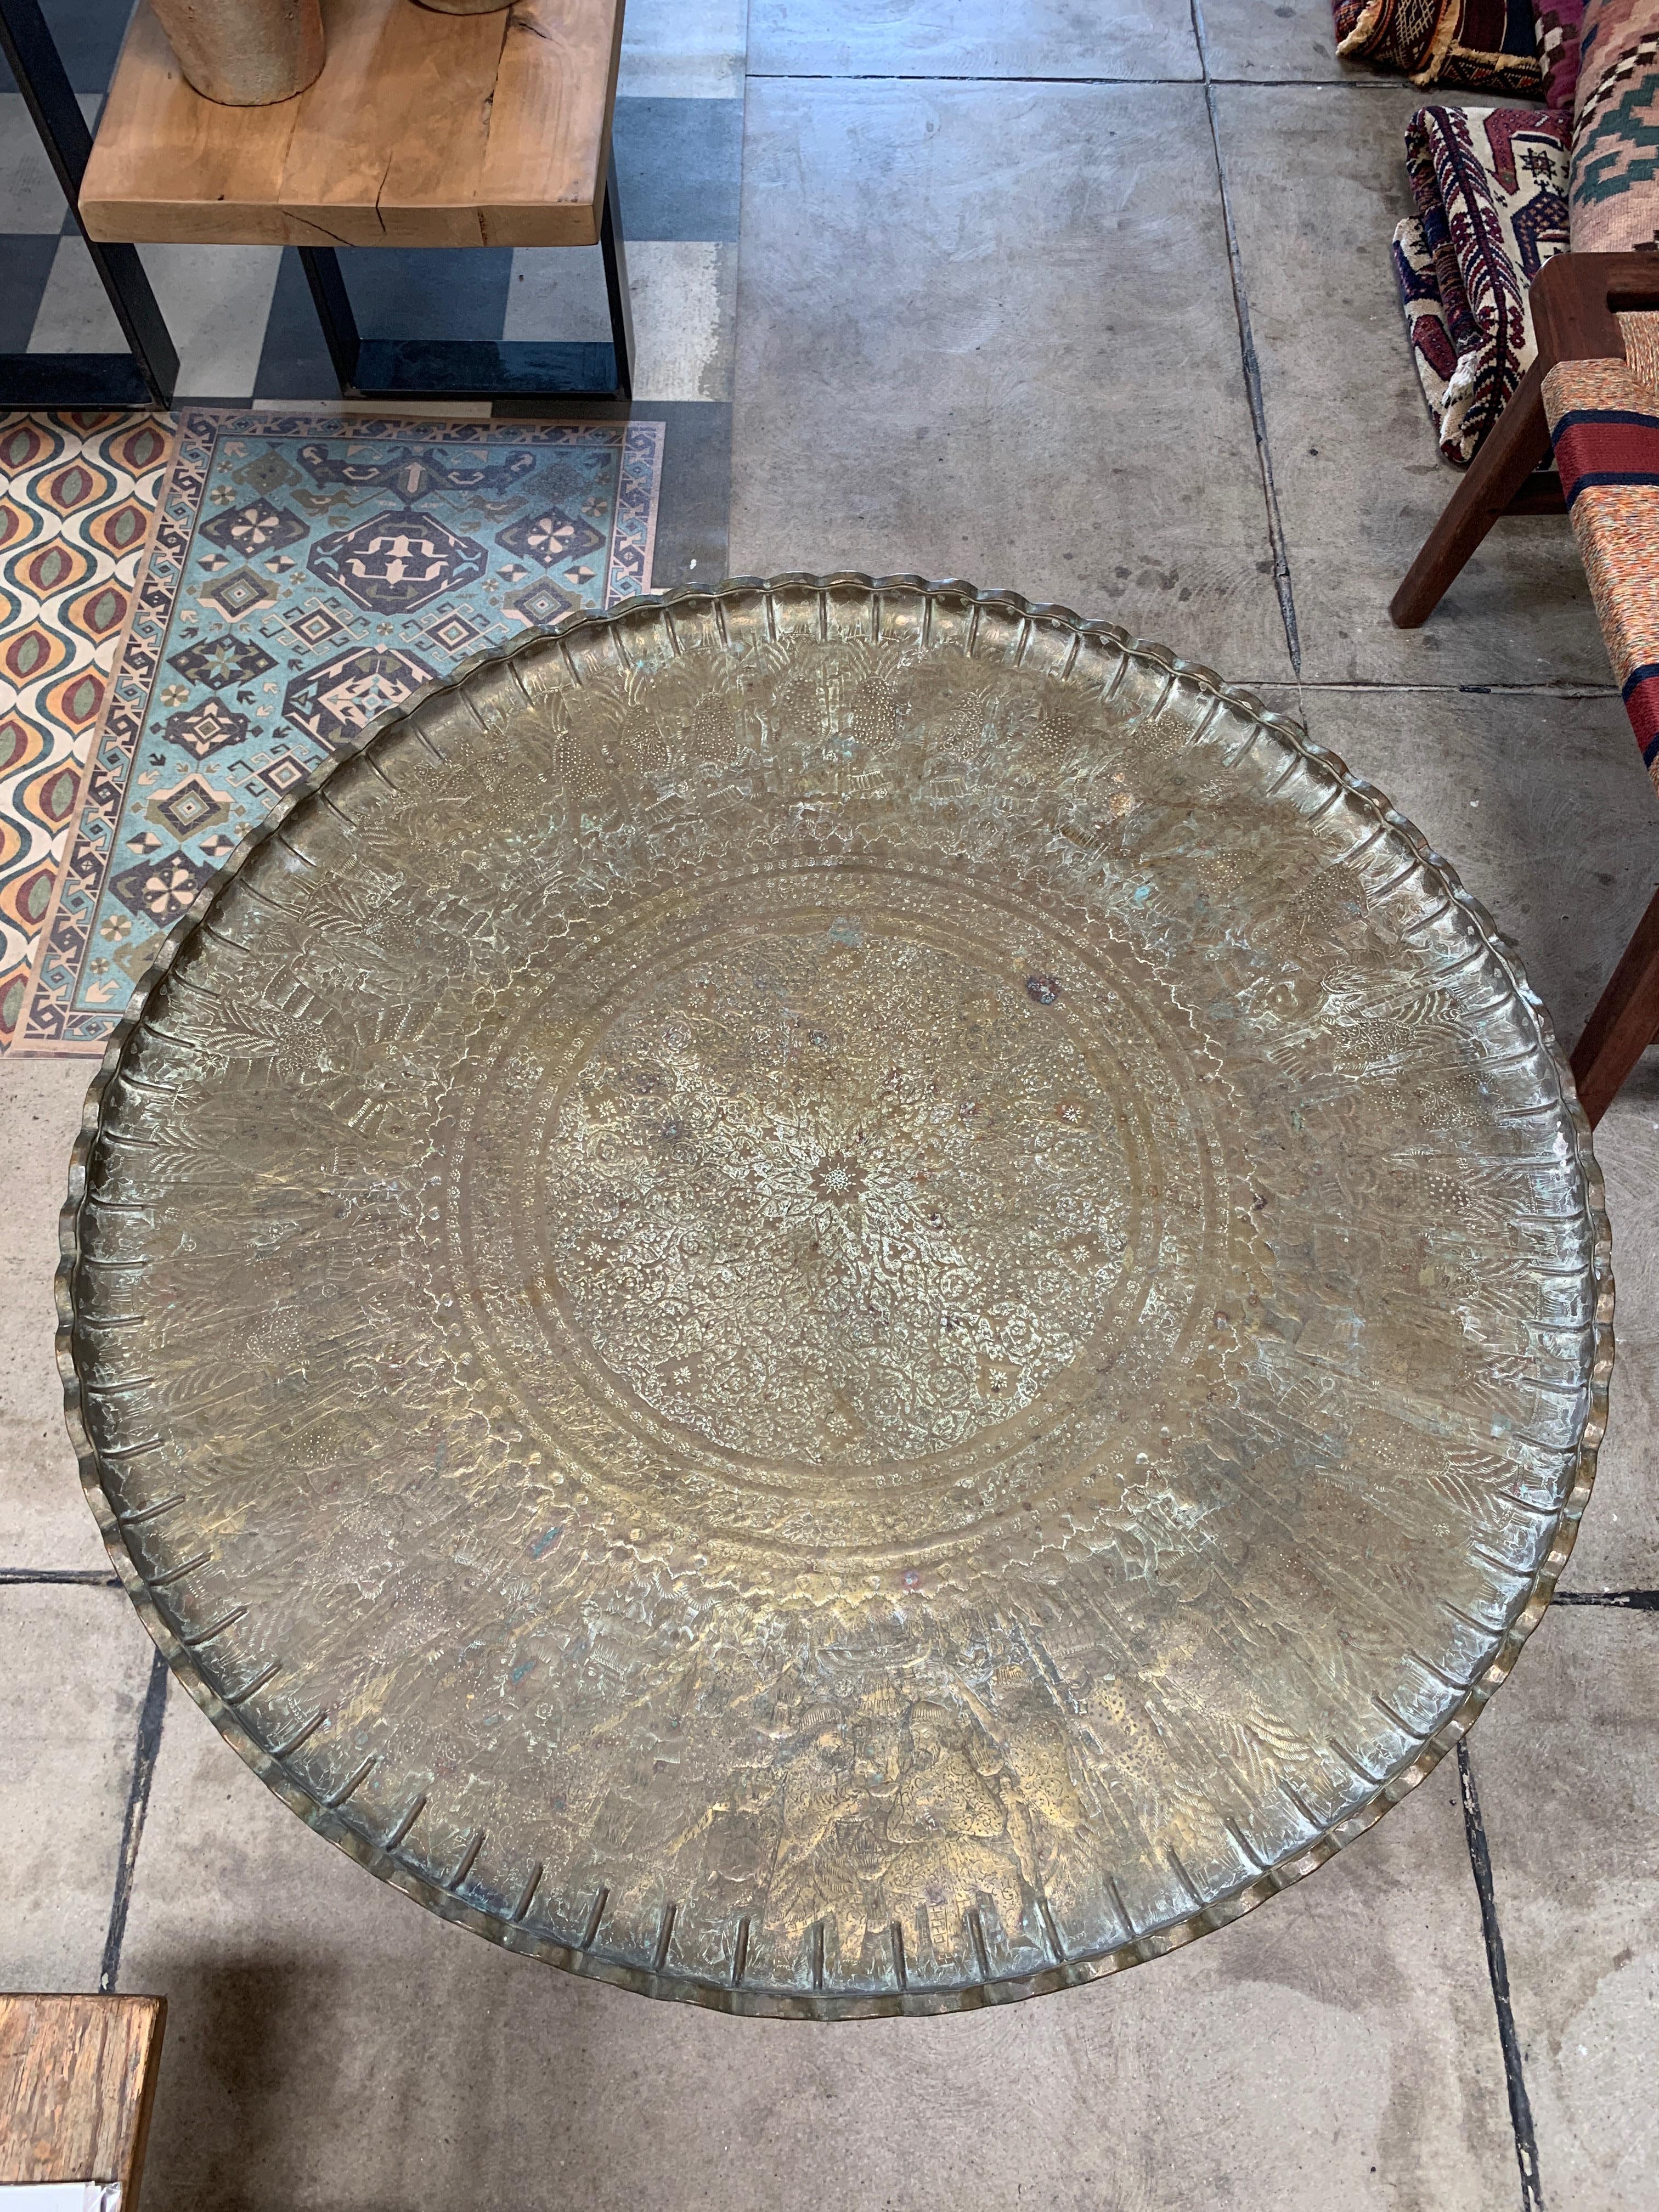 This vintage Moroccan brass tray table retains all of its Art Deco style character. All the fixings are completely original. The brass is carved with intricate designs of men, animals and patterns that, once polished to a shine, make this table an